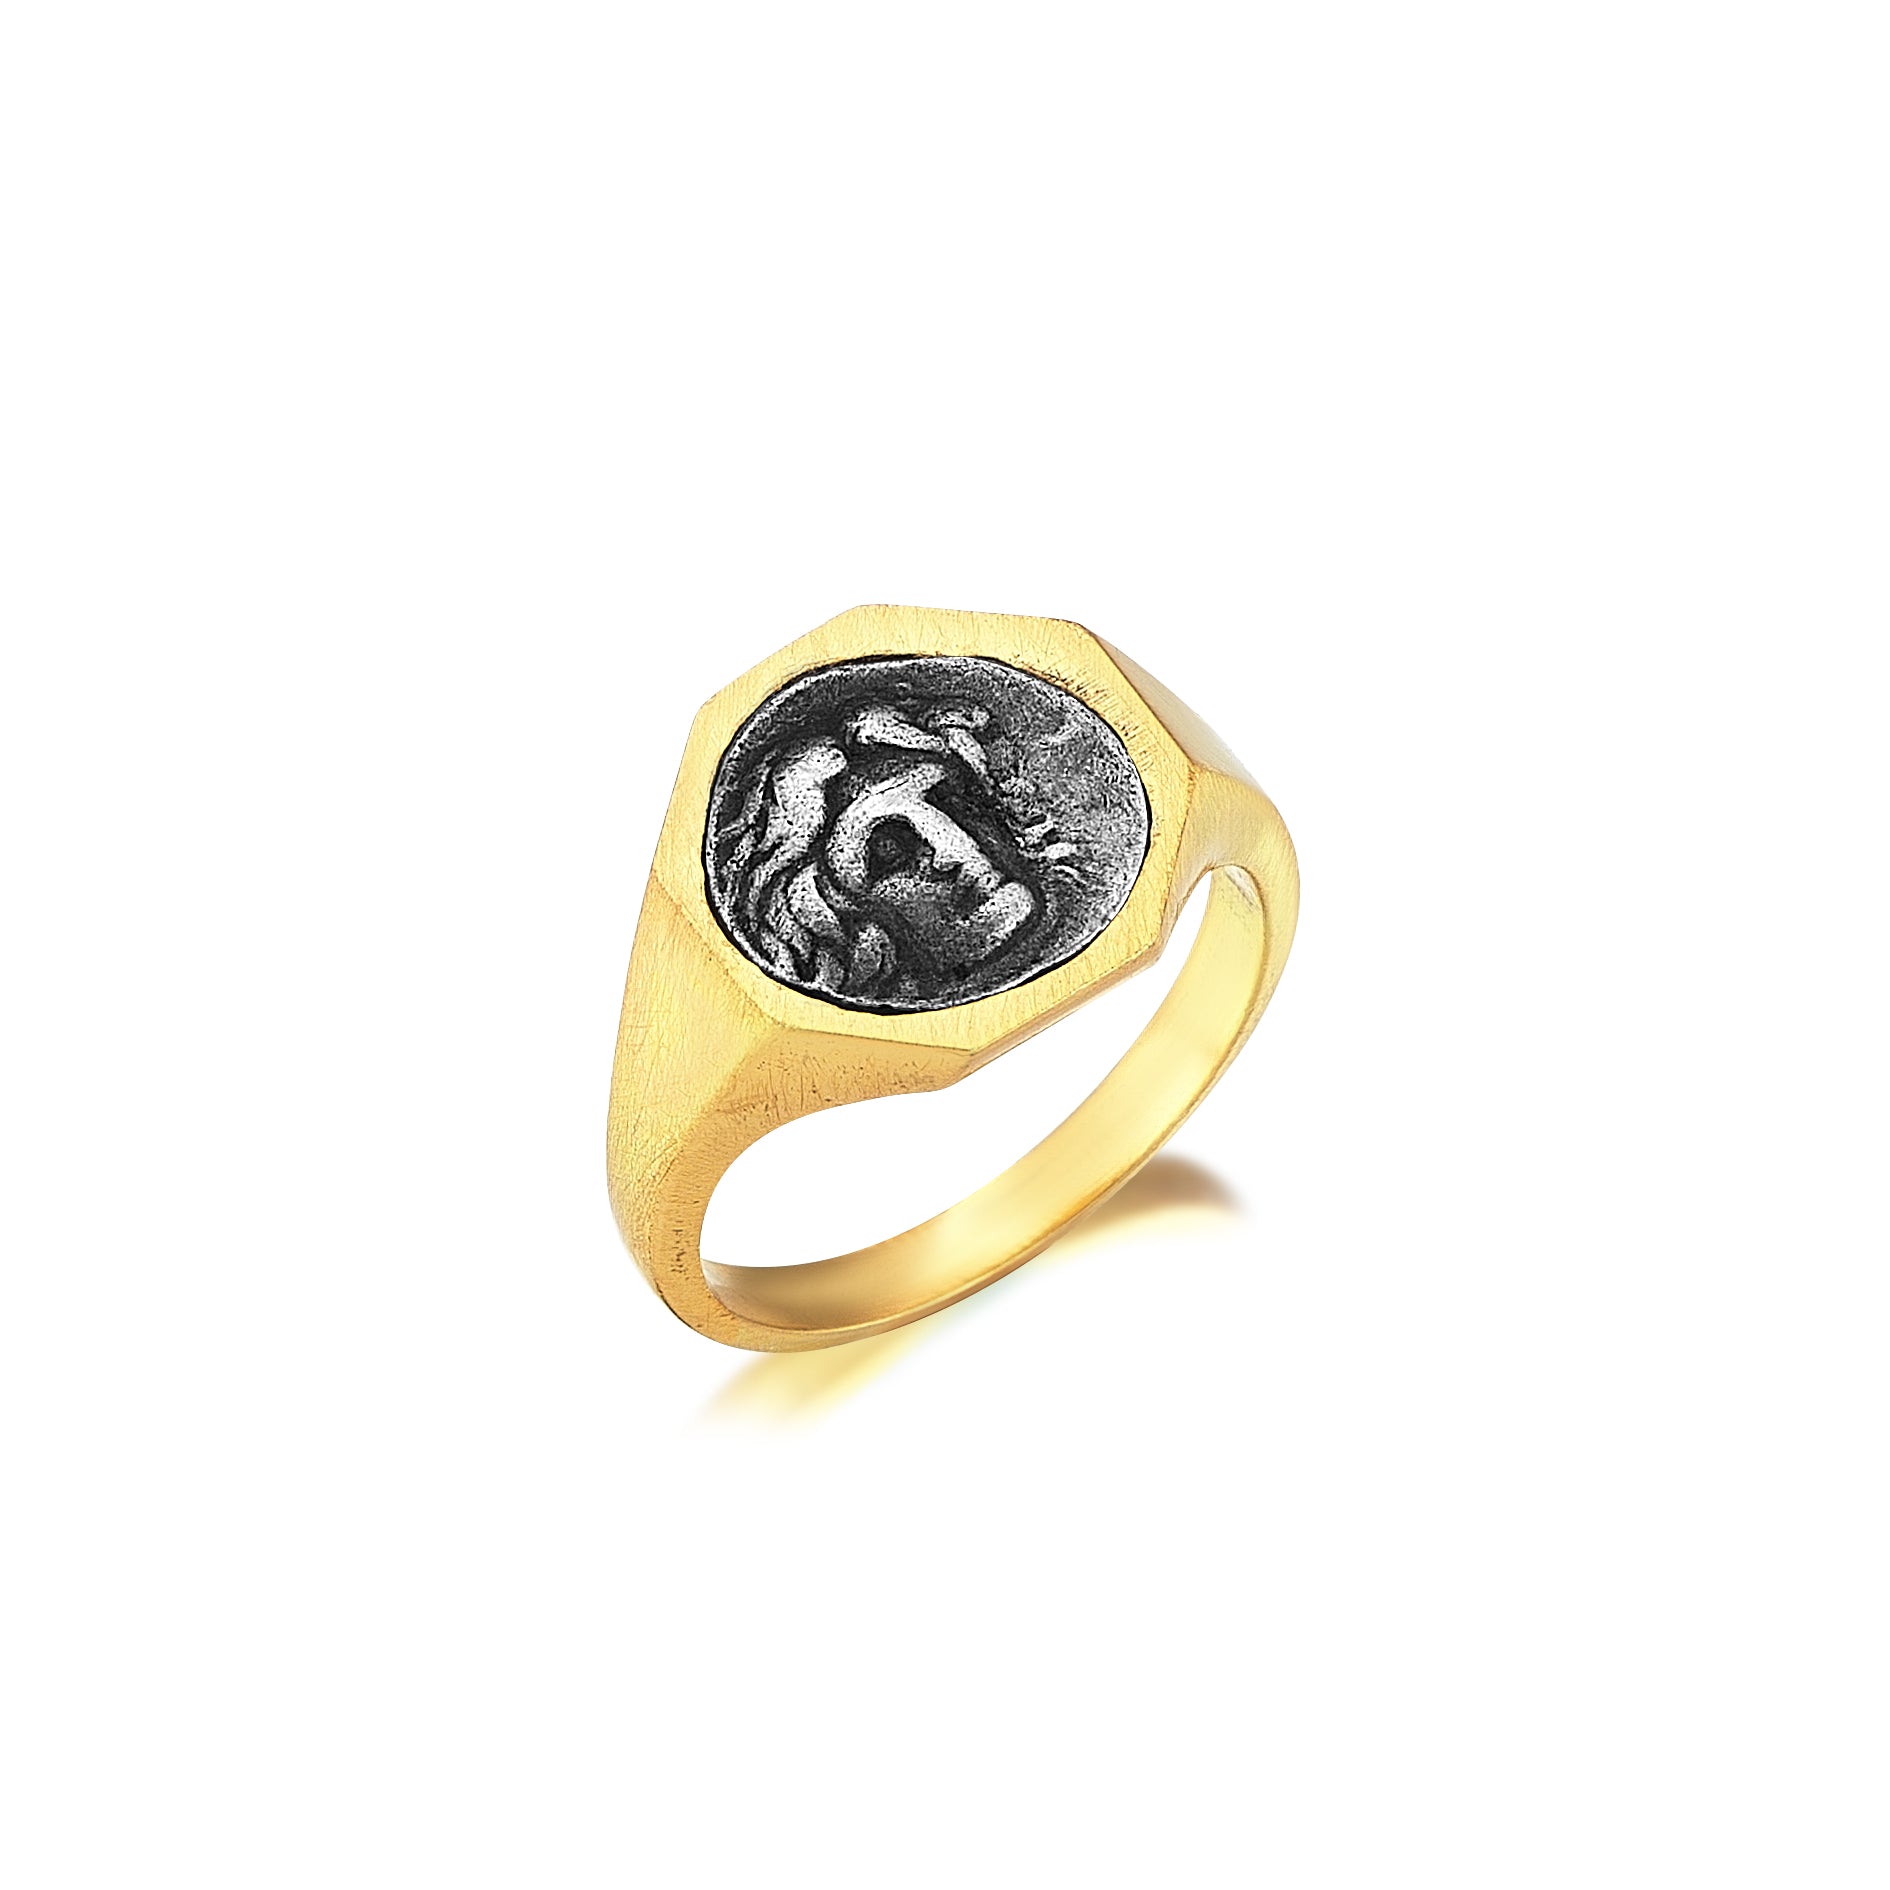 The Alexander The Great Ring